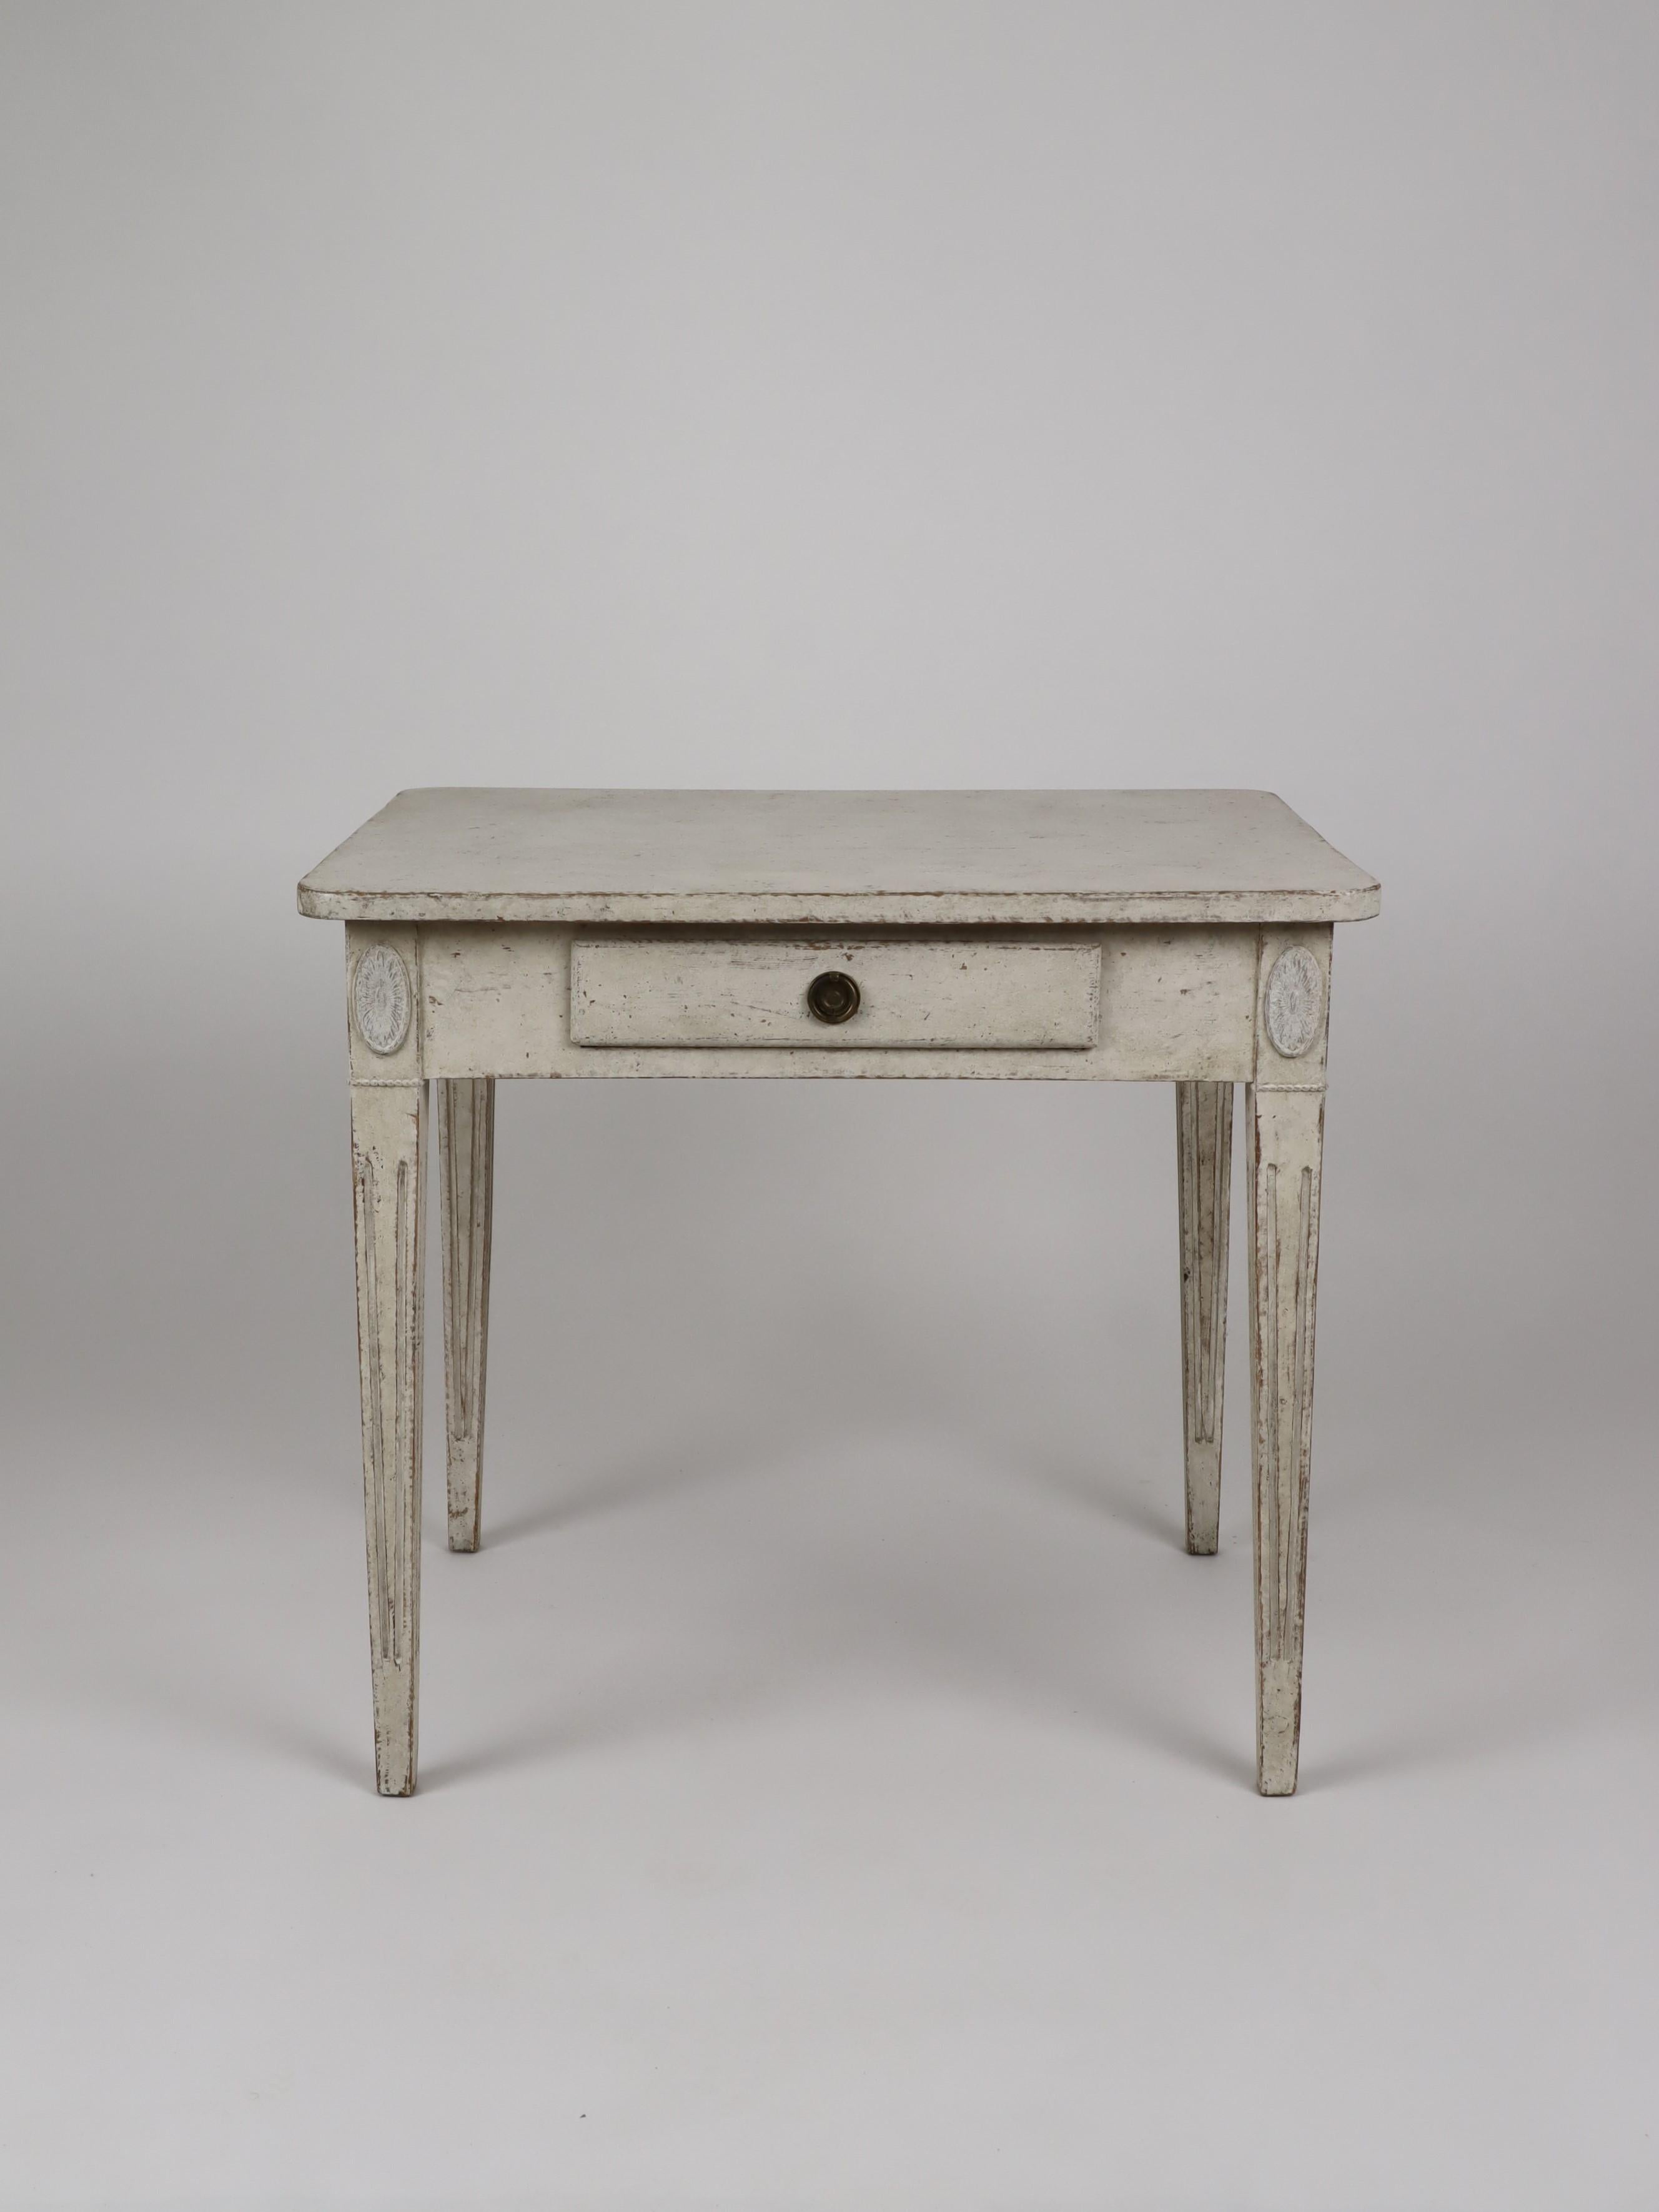 Swedish Gustavian Style 1850s Painted Desk with Single Drawer and Tapered Legs For Sale 7